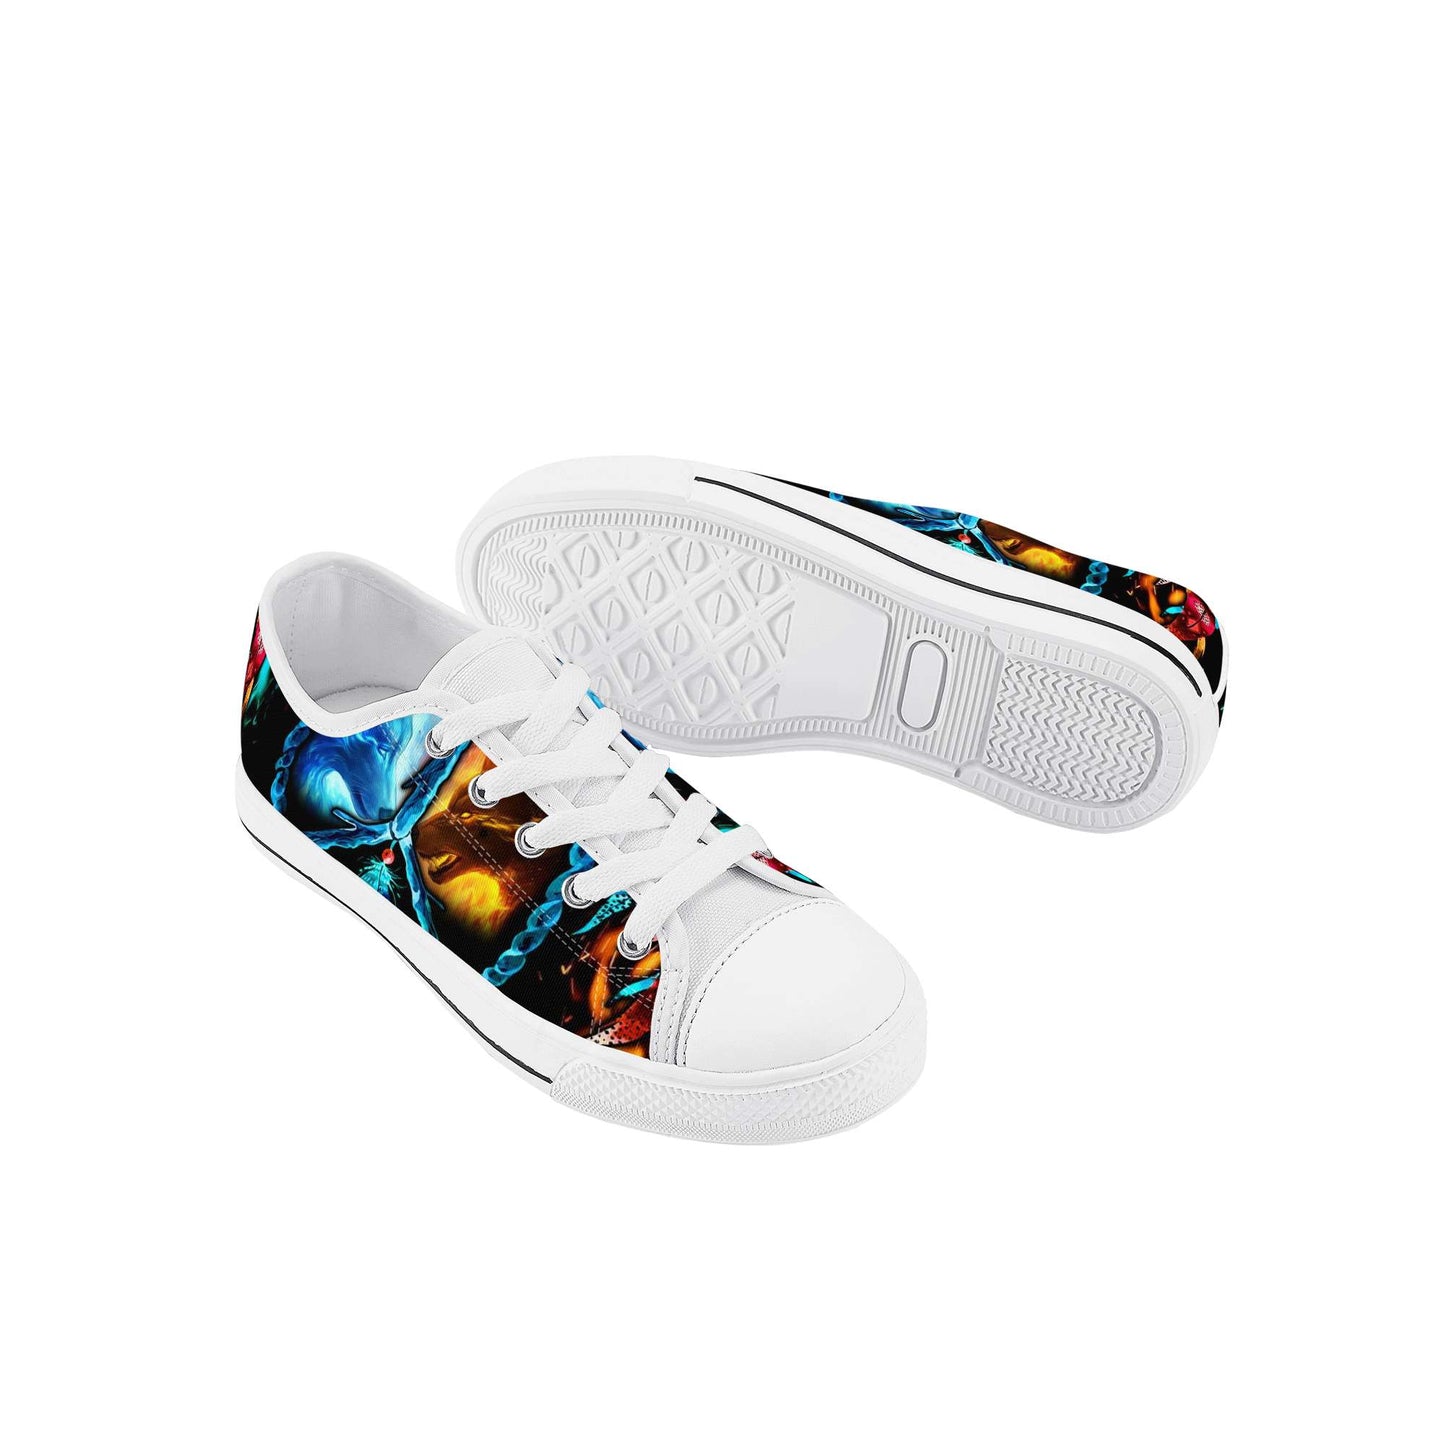 Back to School Kids Low Top Canvas Shoes